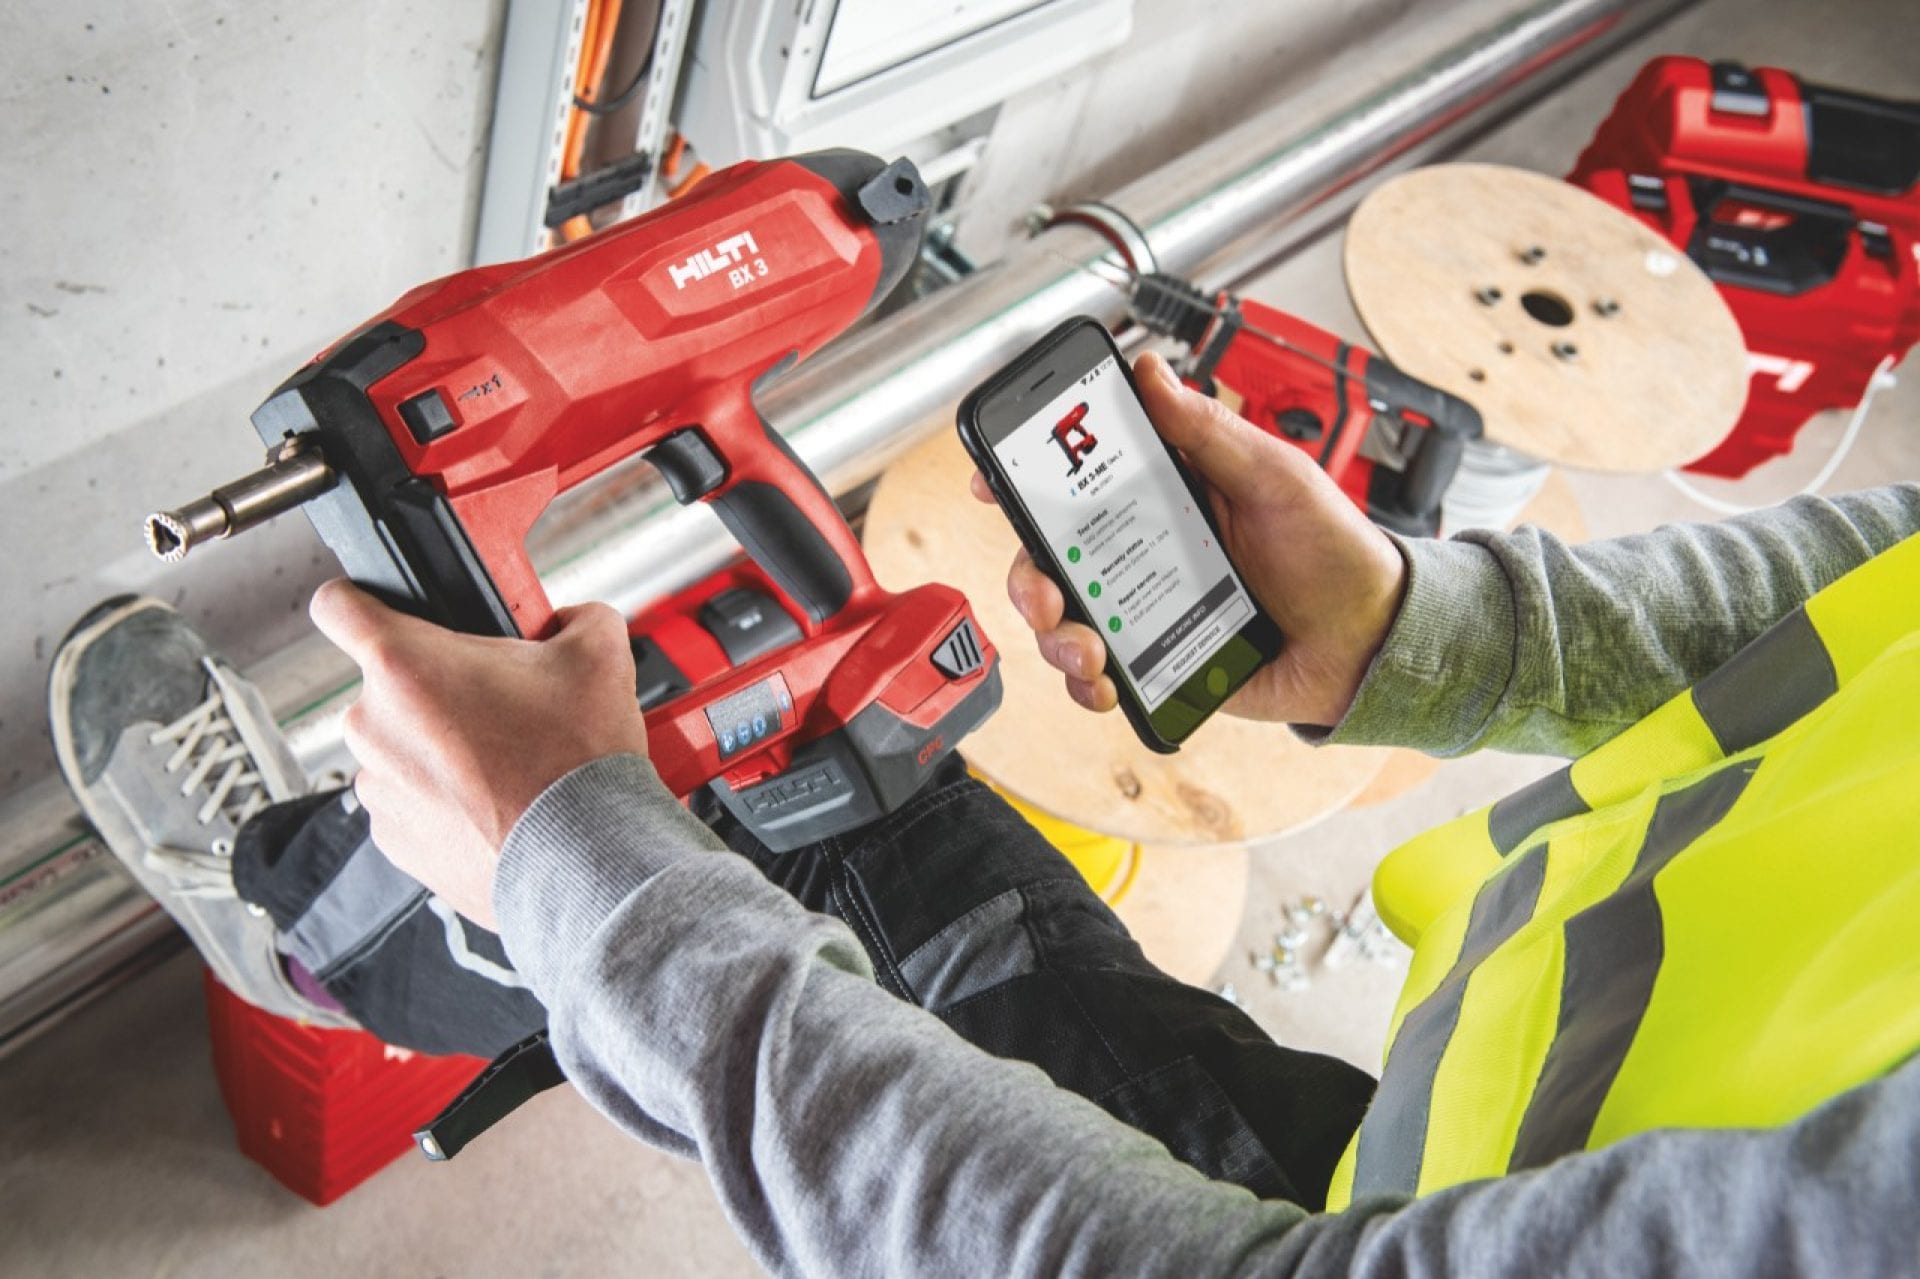 How 'Internet of Things' & cordless tools are driving productivity in construction